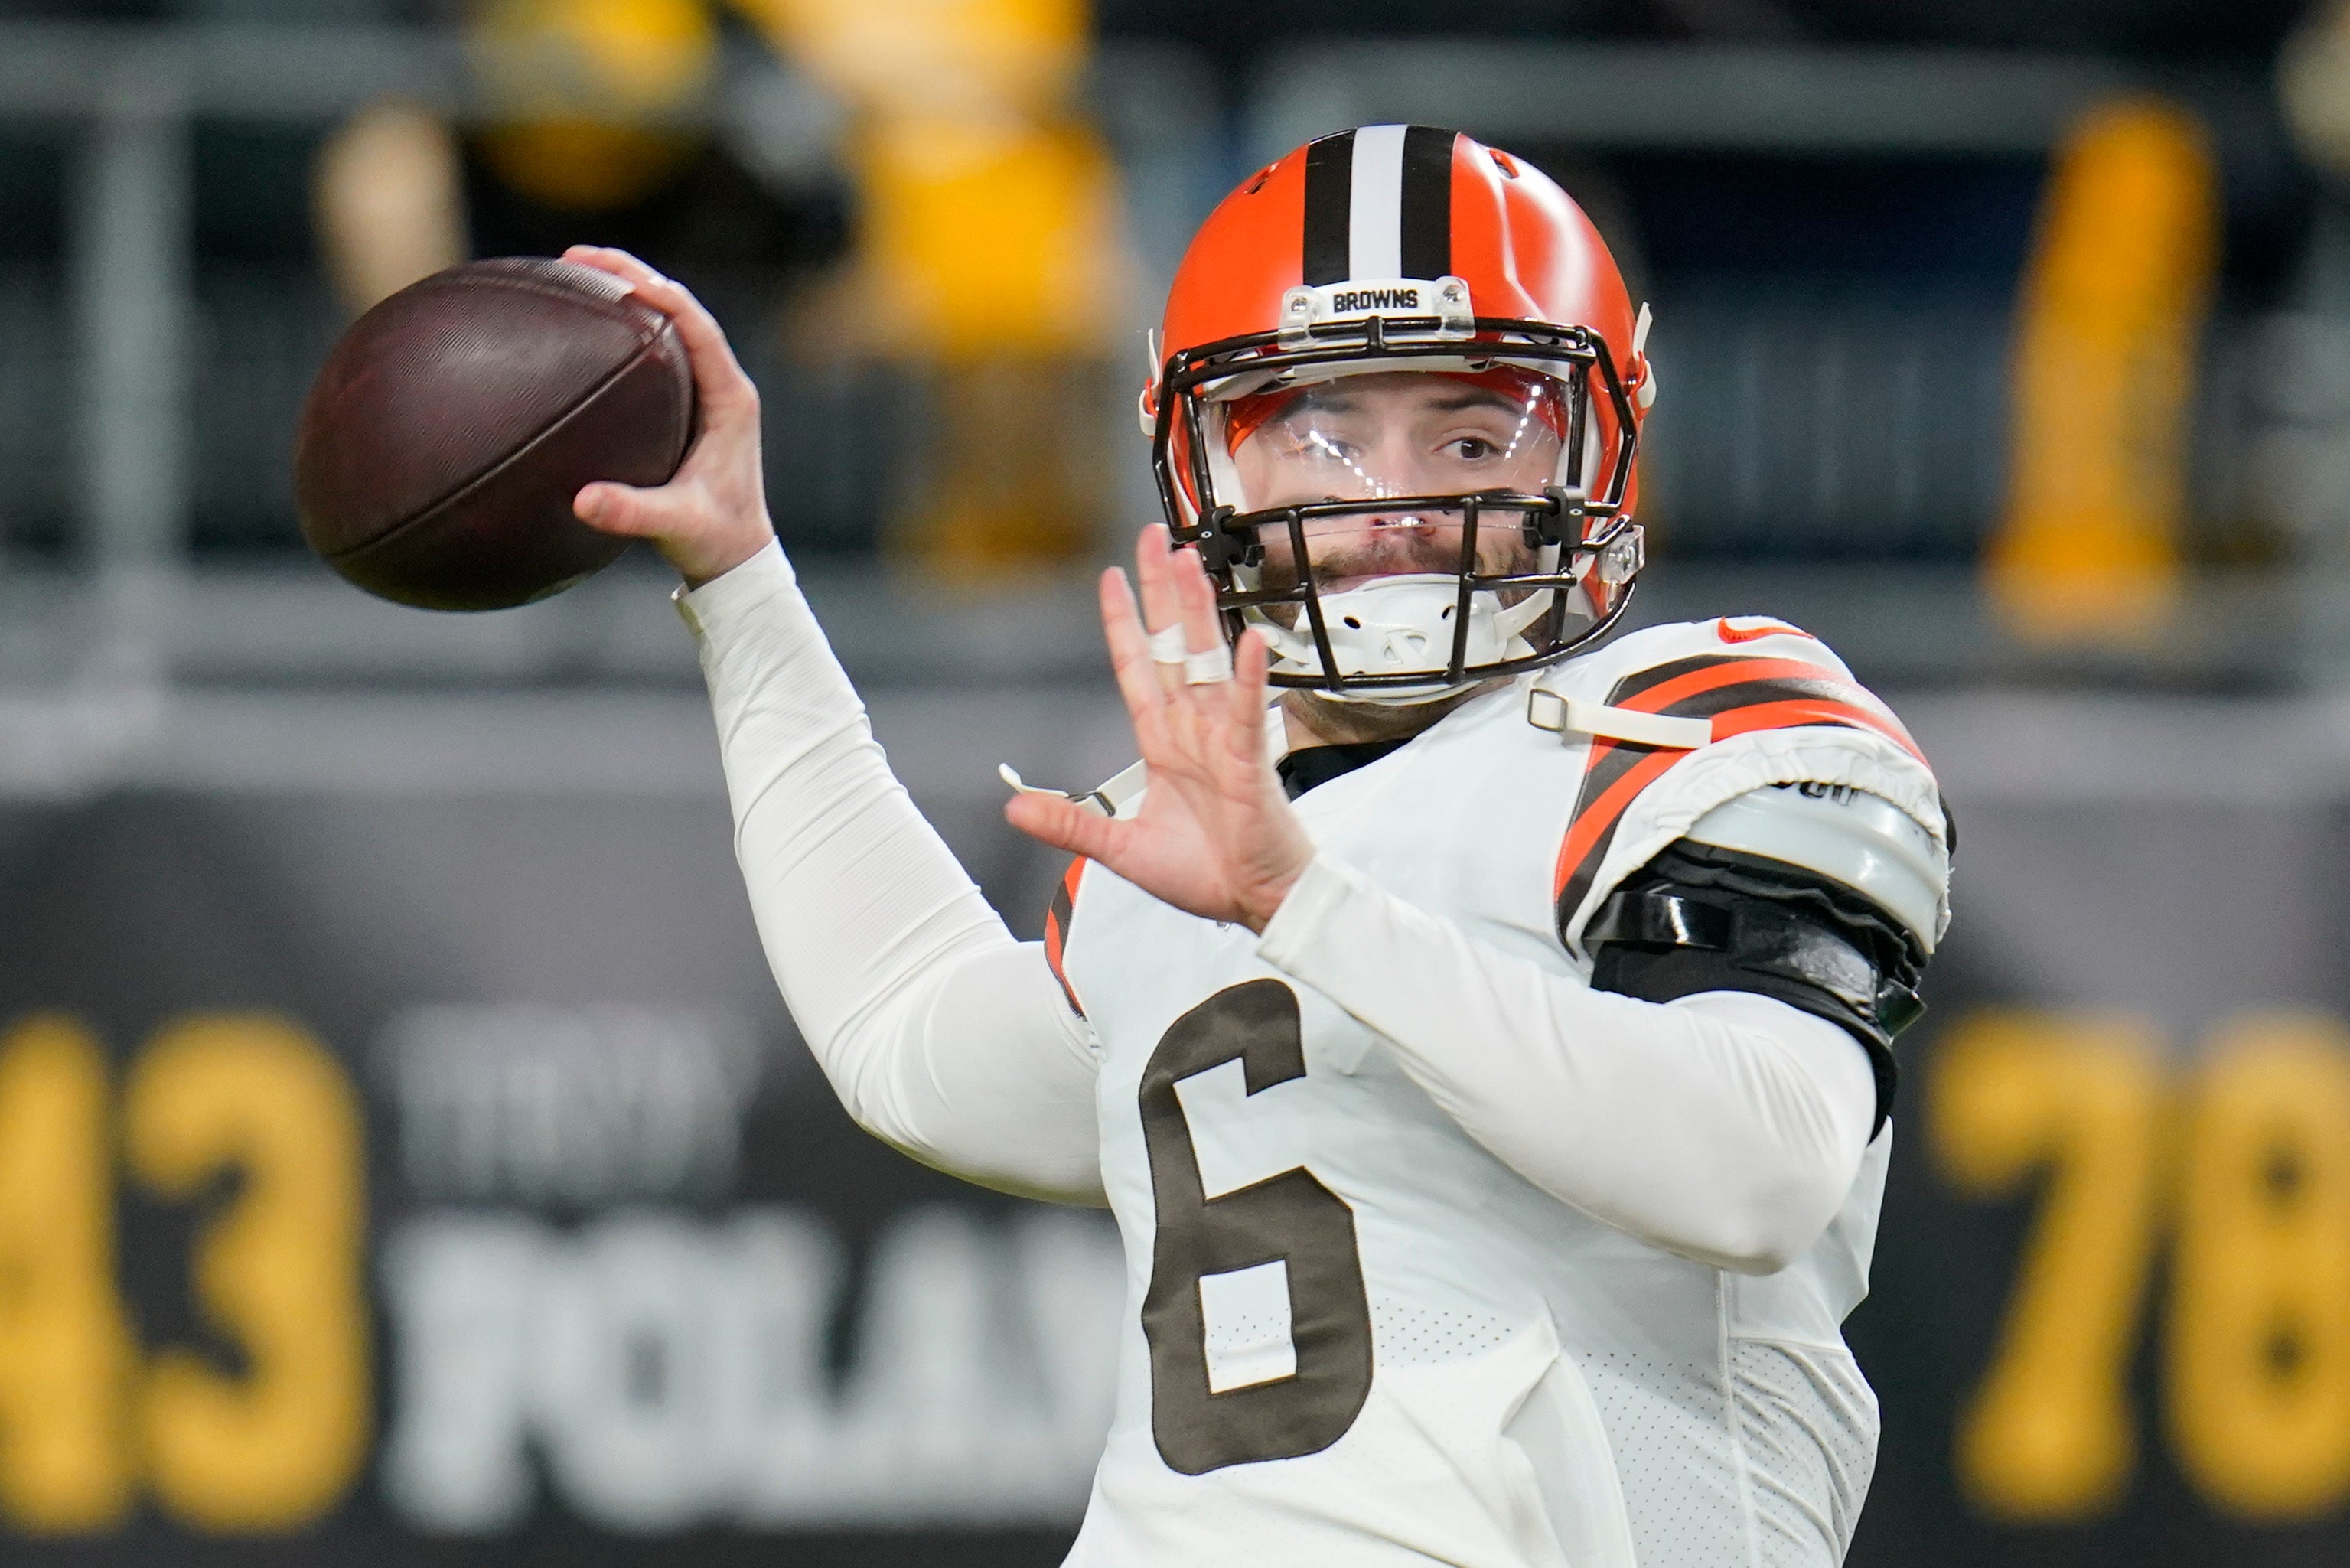 BROWNS-MAYFIELD CANJE